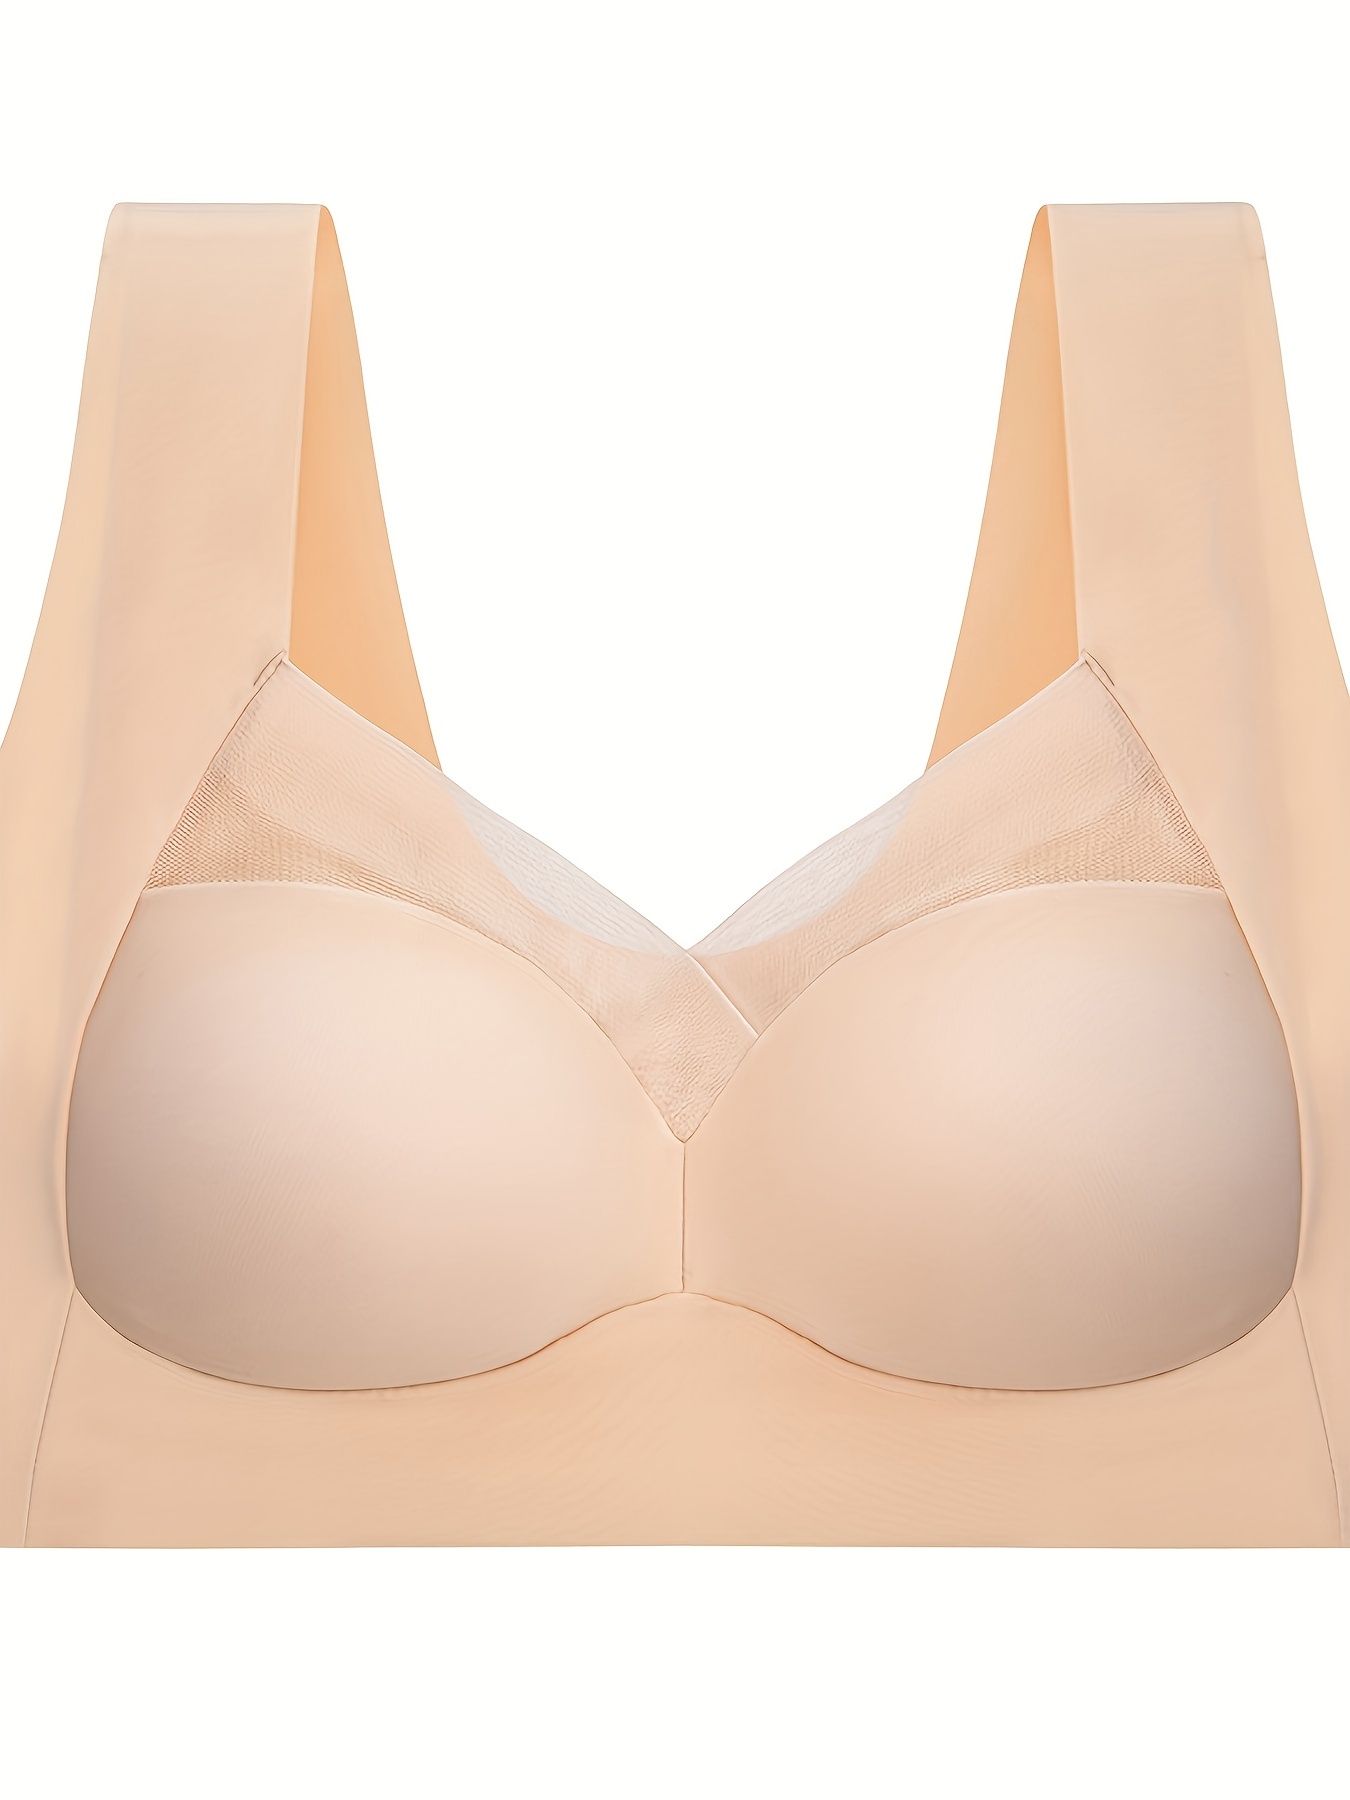 OUSITAID Women‘s Comfy Soft Full Coverage Push Up Bra Everyday Basic T  Shirt Bra for Women